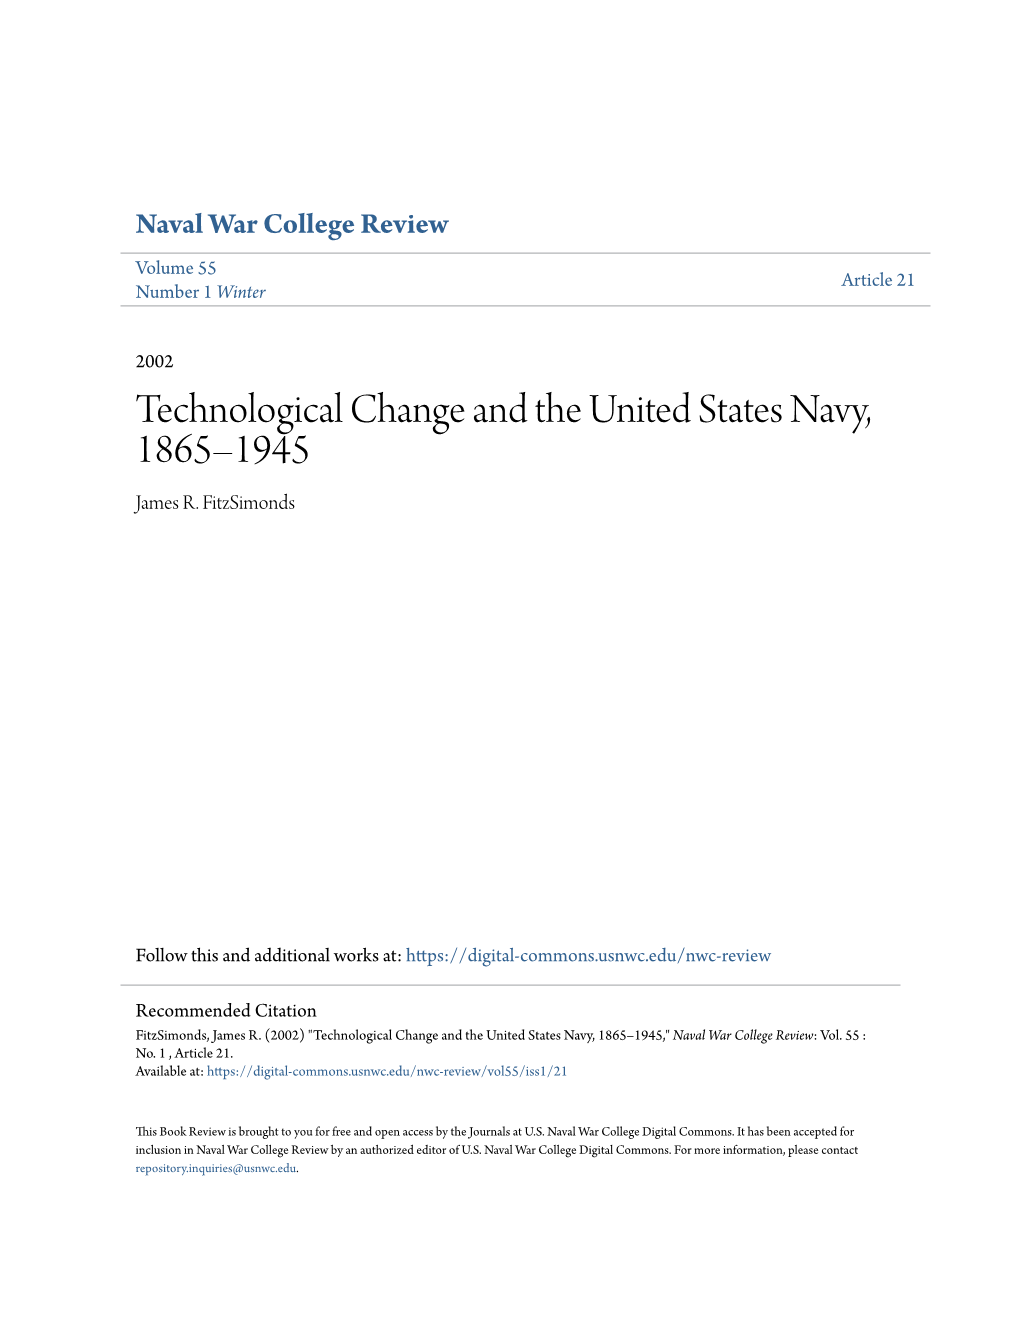 Technological Change and the United States Navy, 1865–1945 James R